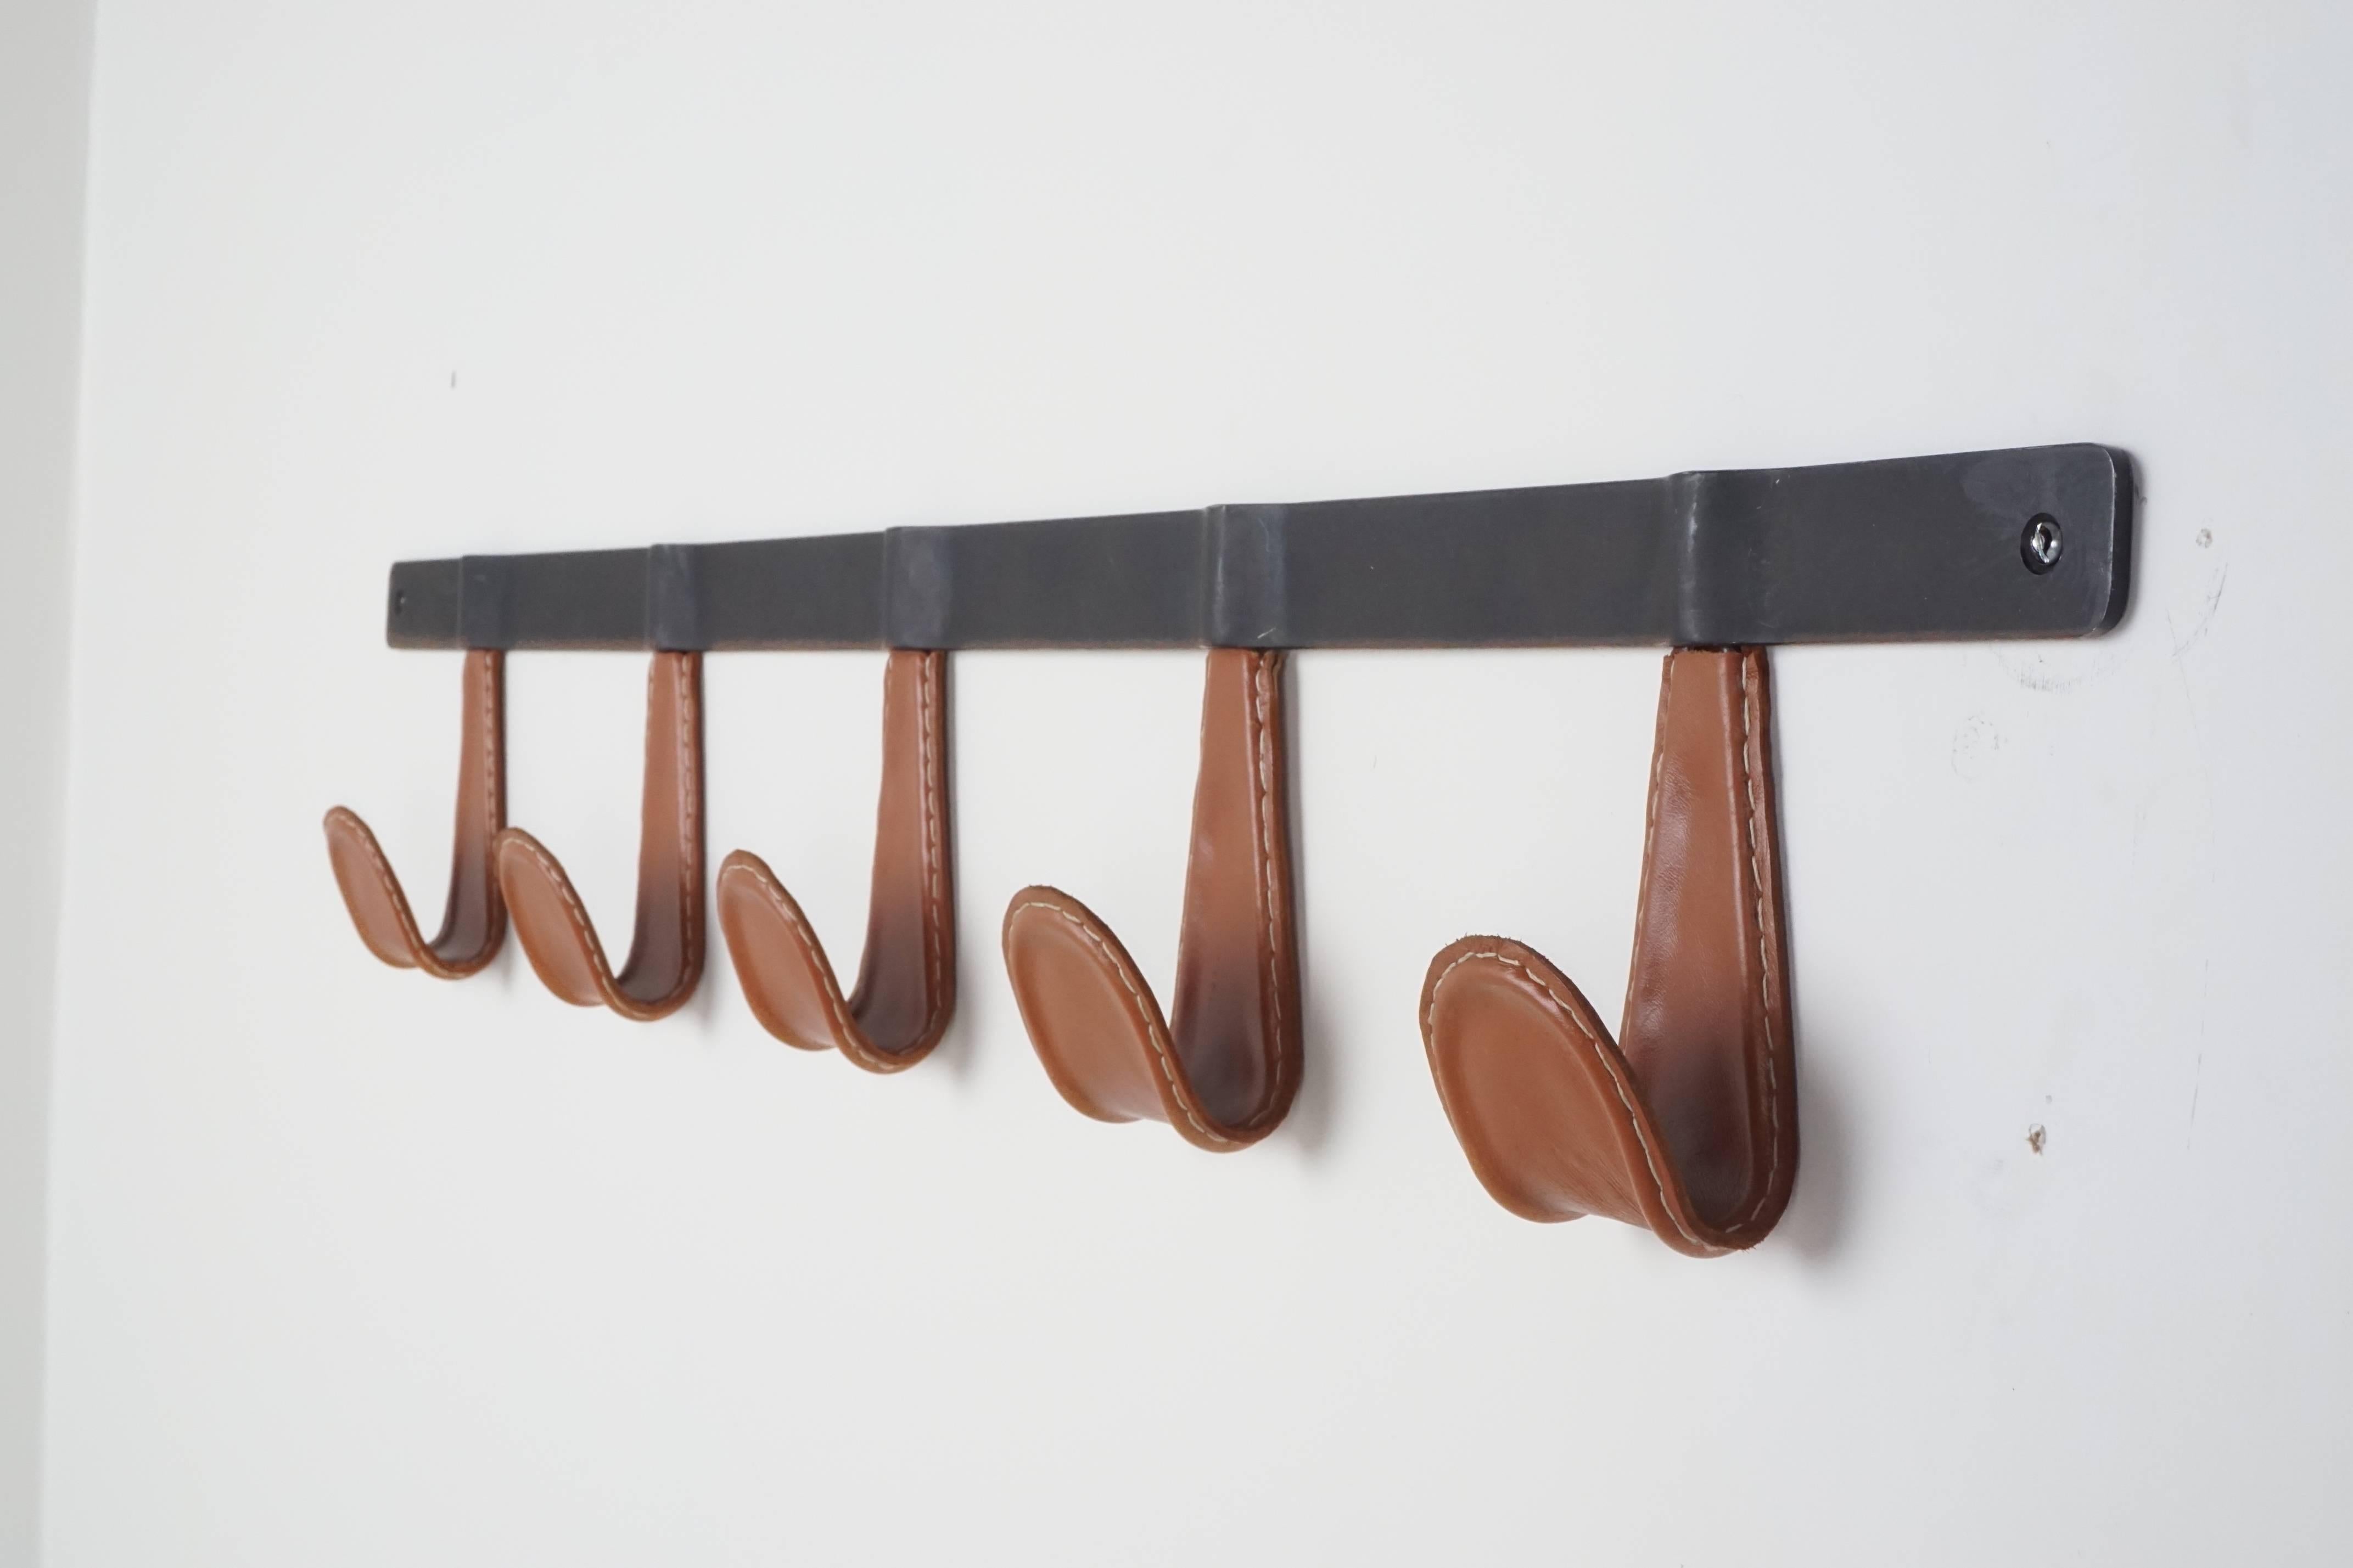 Five hooks wrapped in leather with contrast stitching. Newly produced by Orange Furniture and available in; cognac (shown) chocolate, black and COL.